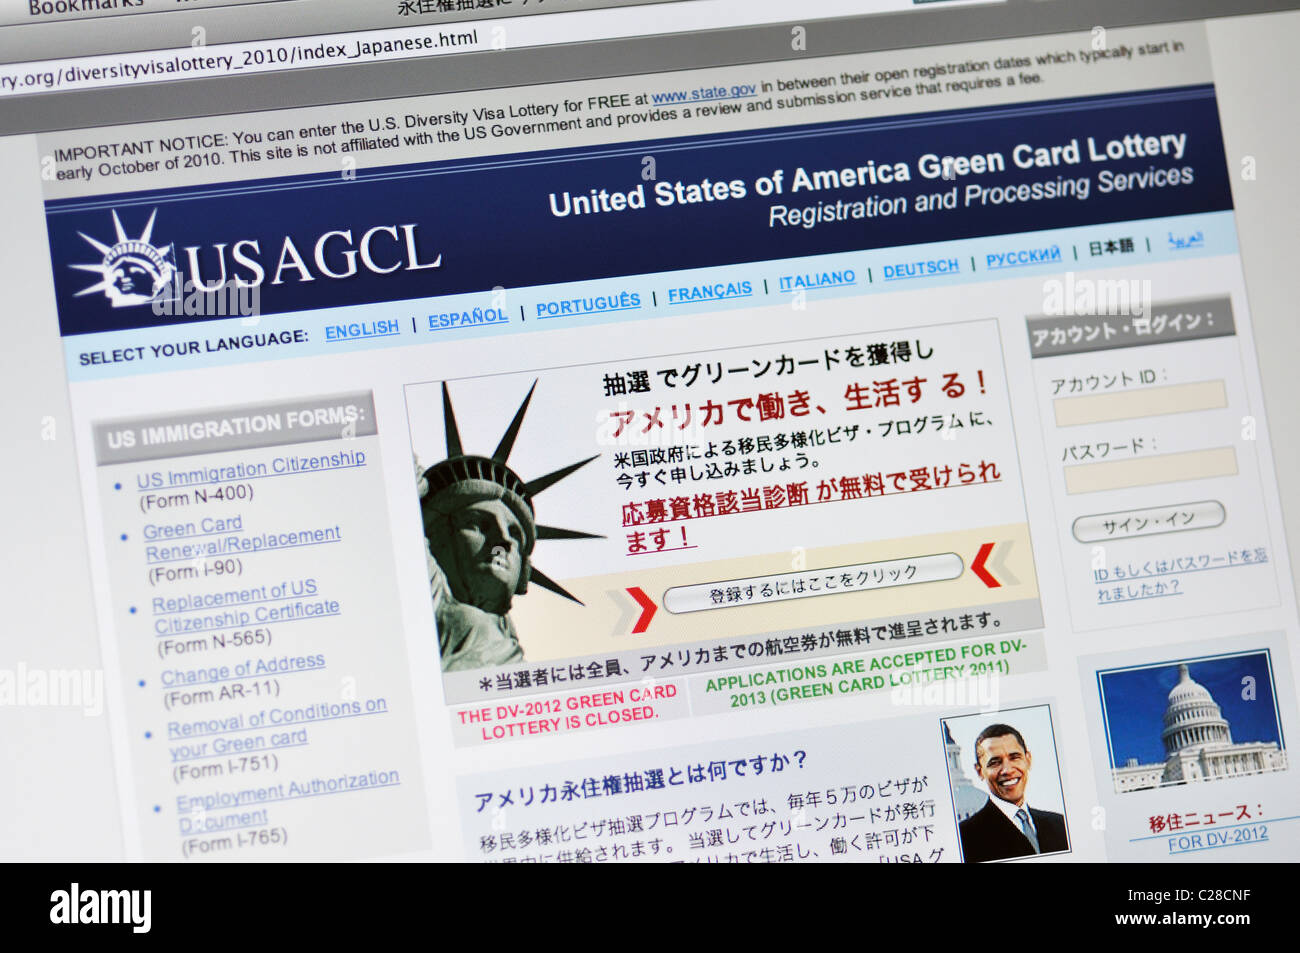 USAGCL website - United States of America Green Card Lottery - in Chinese Stock Photo